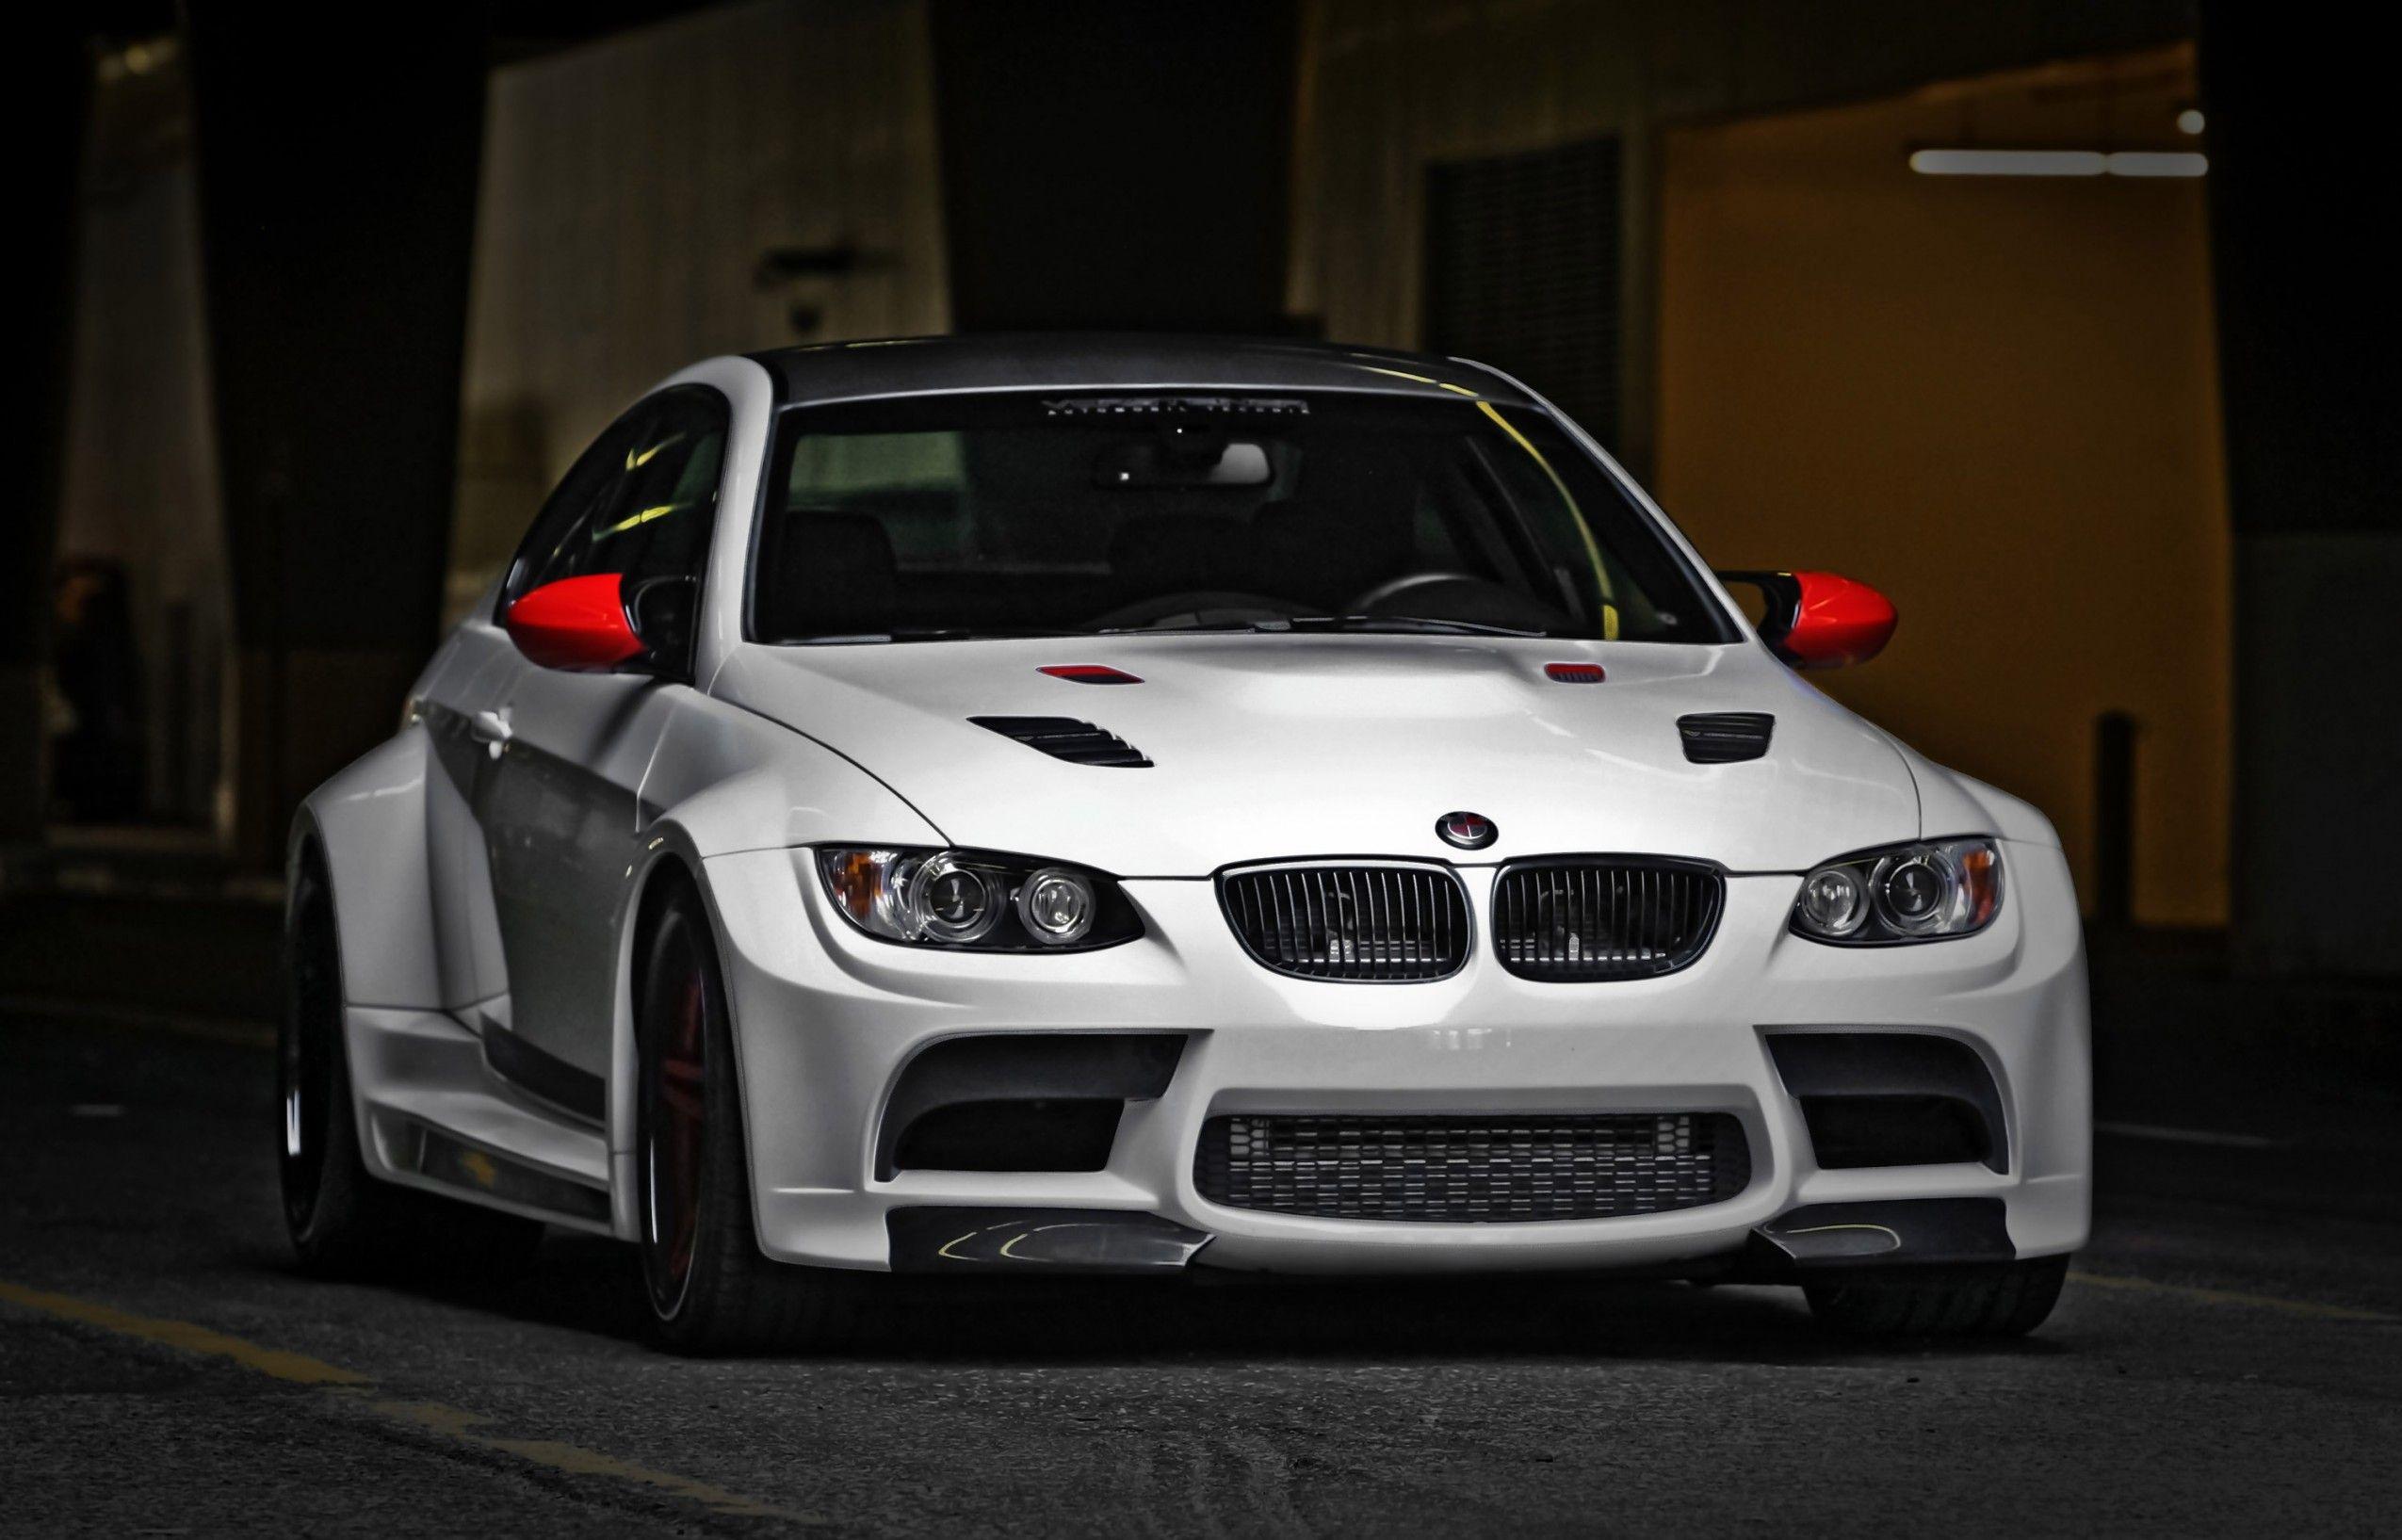 Download 2550x1635 Bmw M3 Gtrs White, Front View, Sport, Cars